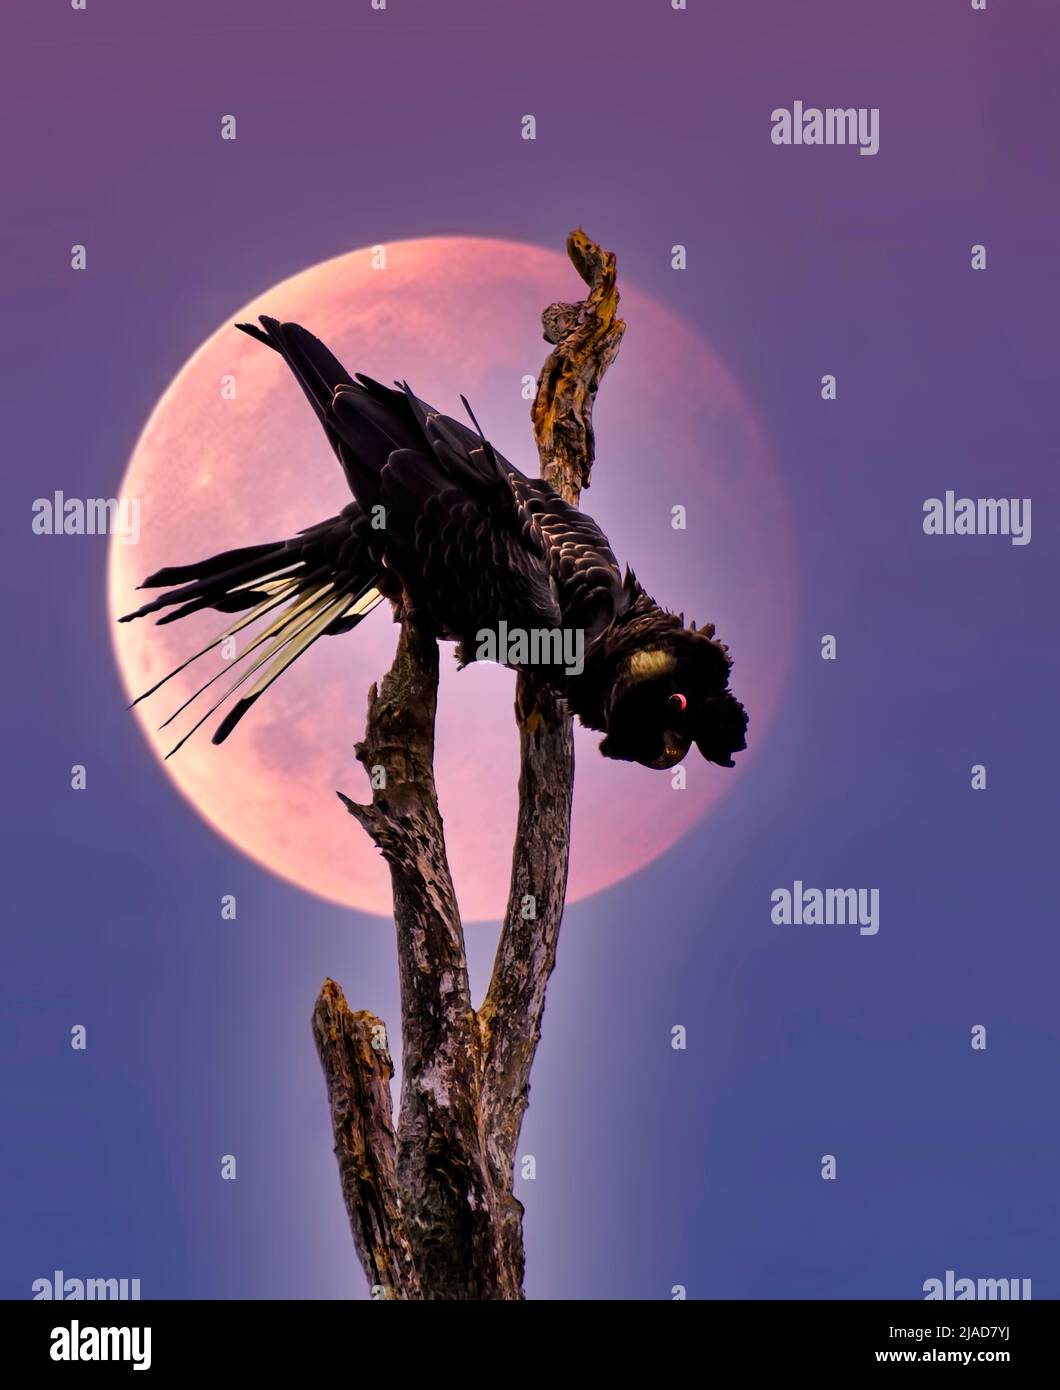 Short-billed Black Cockatoo (Calyptorhynchus latirostris) perched on a branch in front of a full moon, Australia Stock Photo